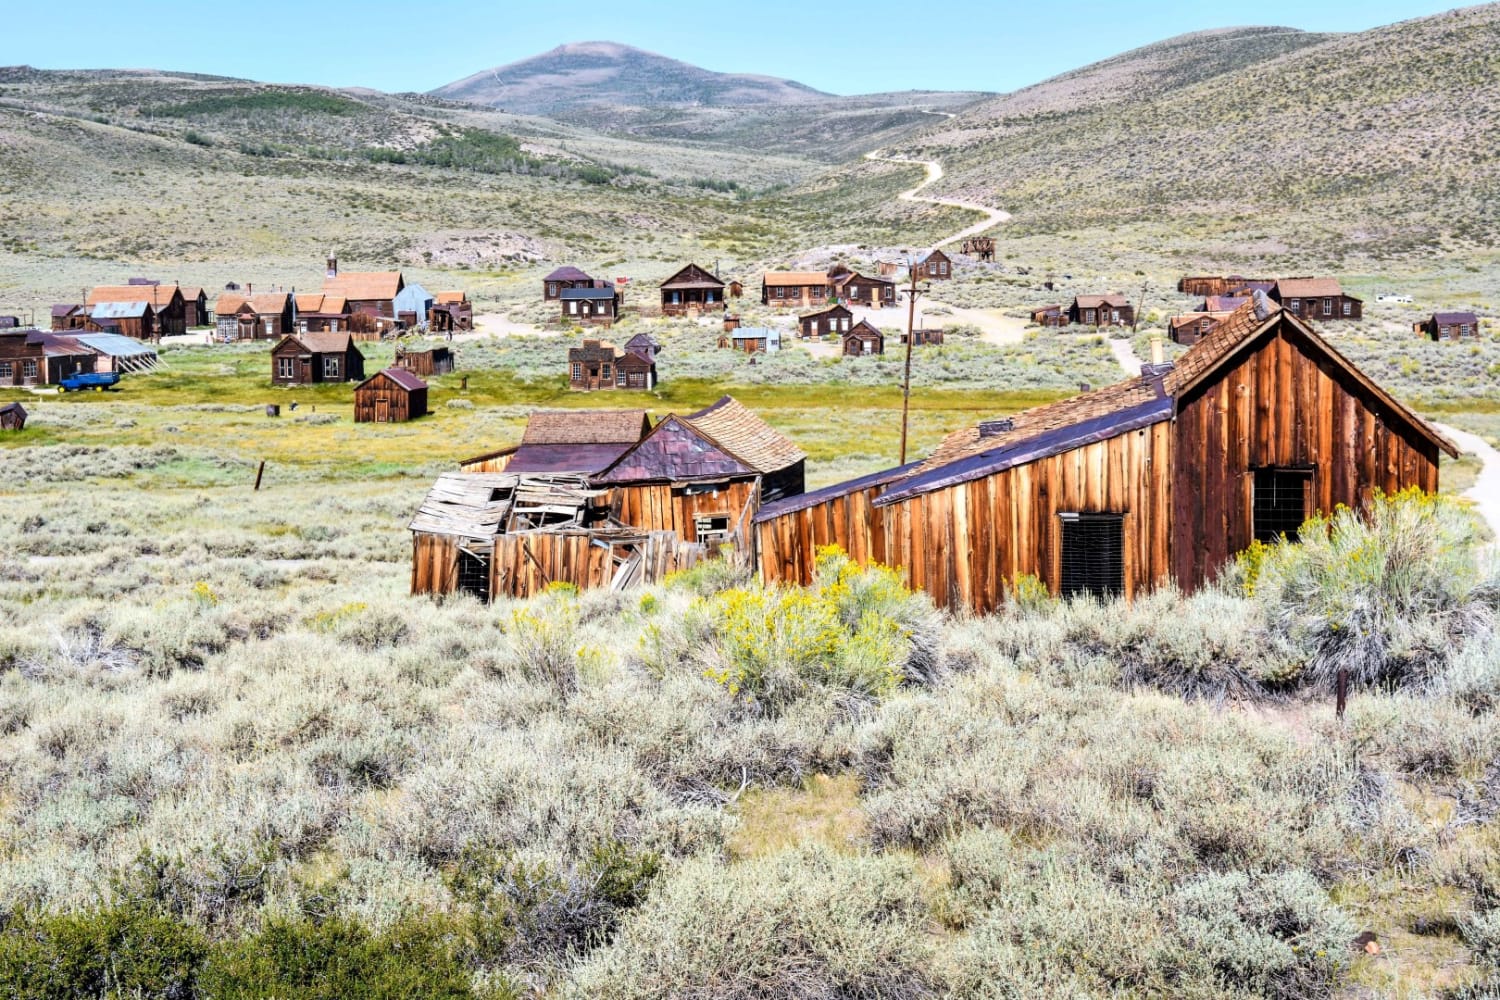 Bodie State Park: A Historic Ghost Town - The Unending Journey